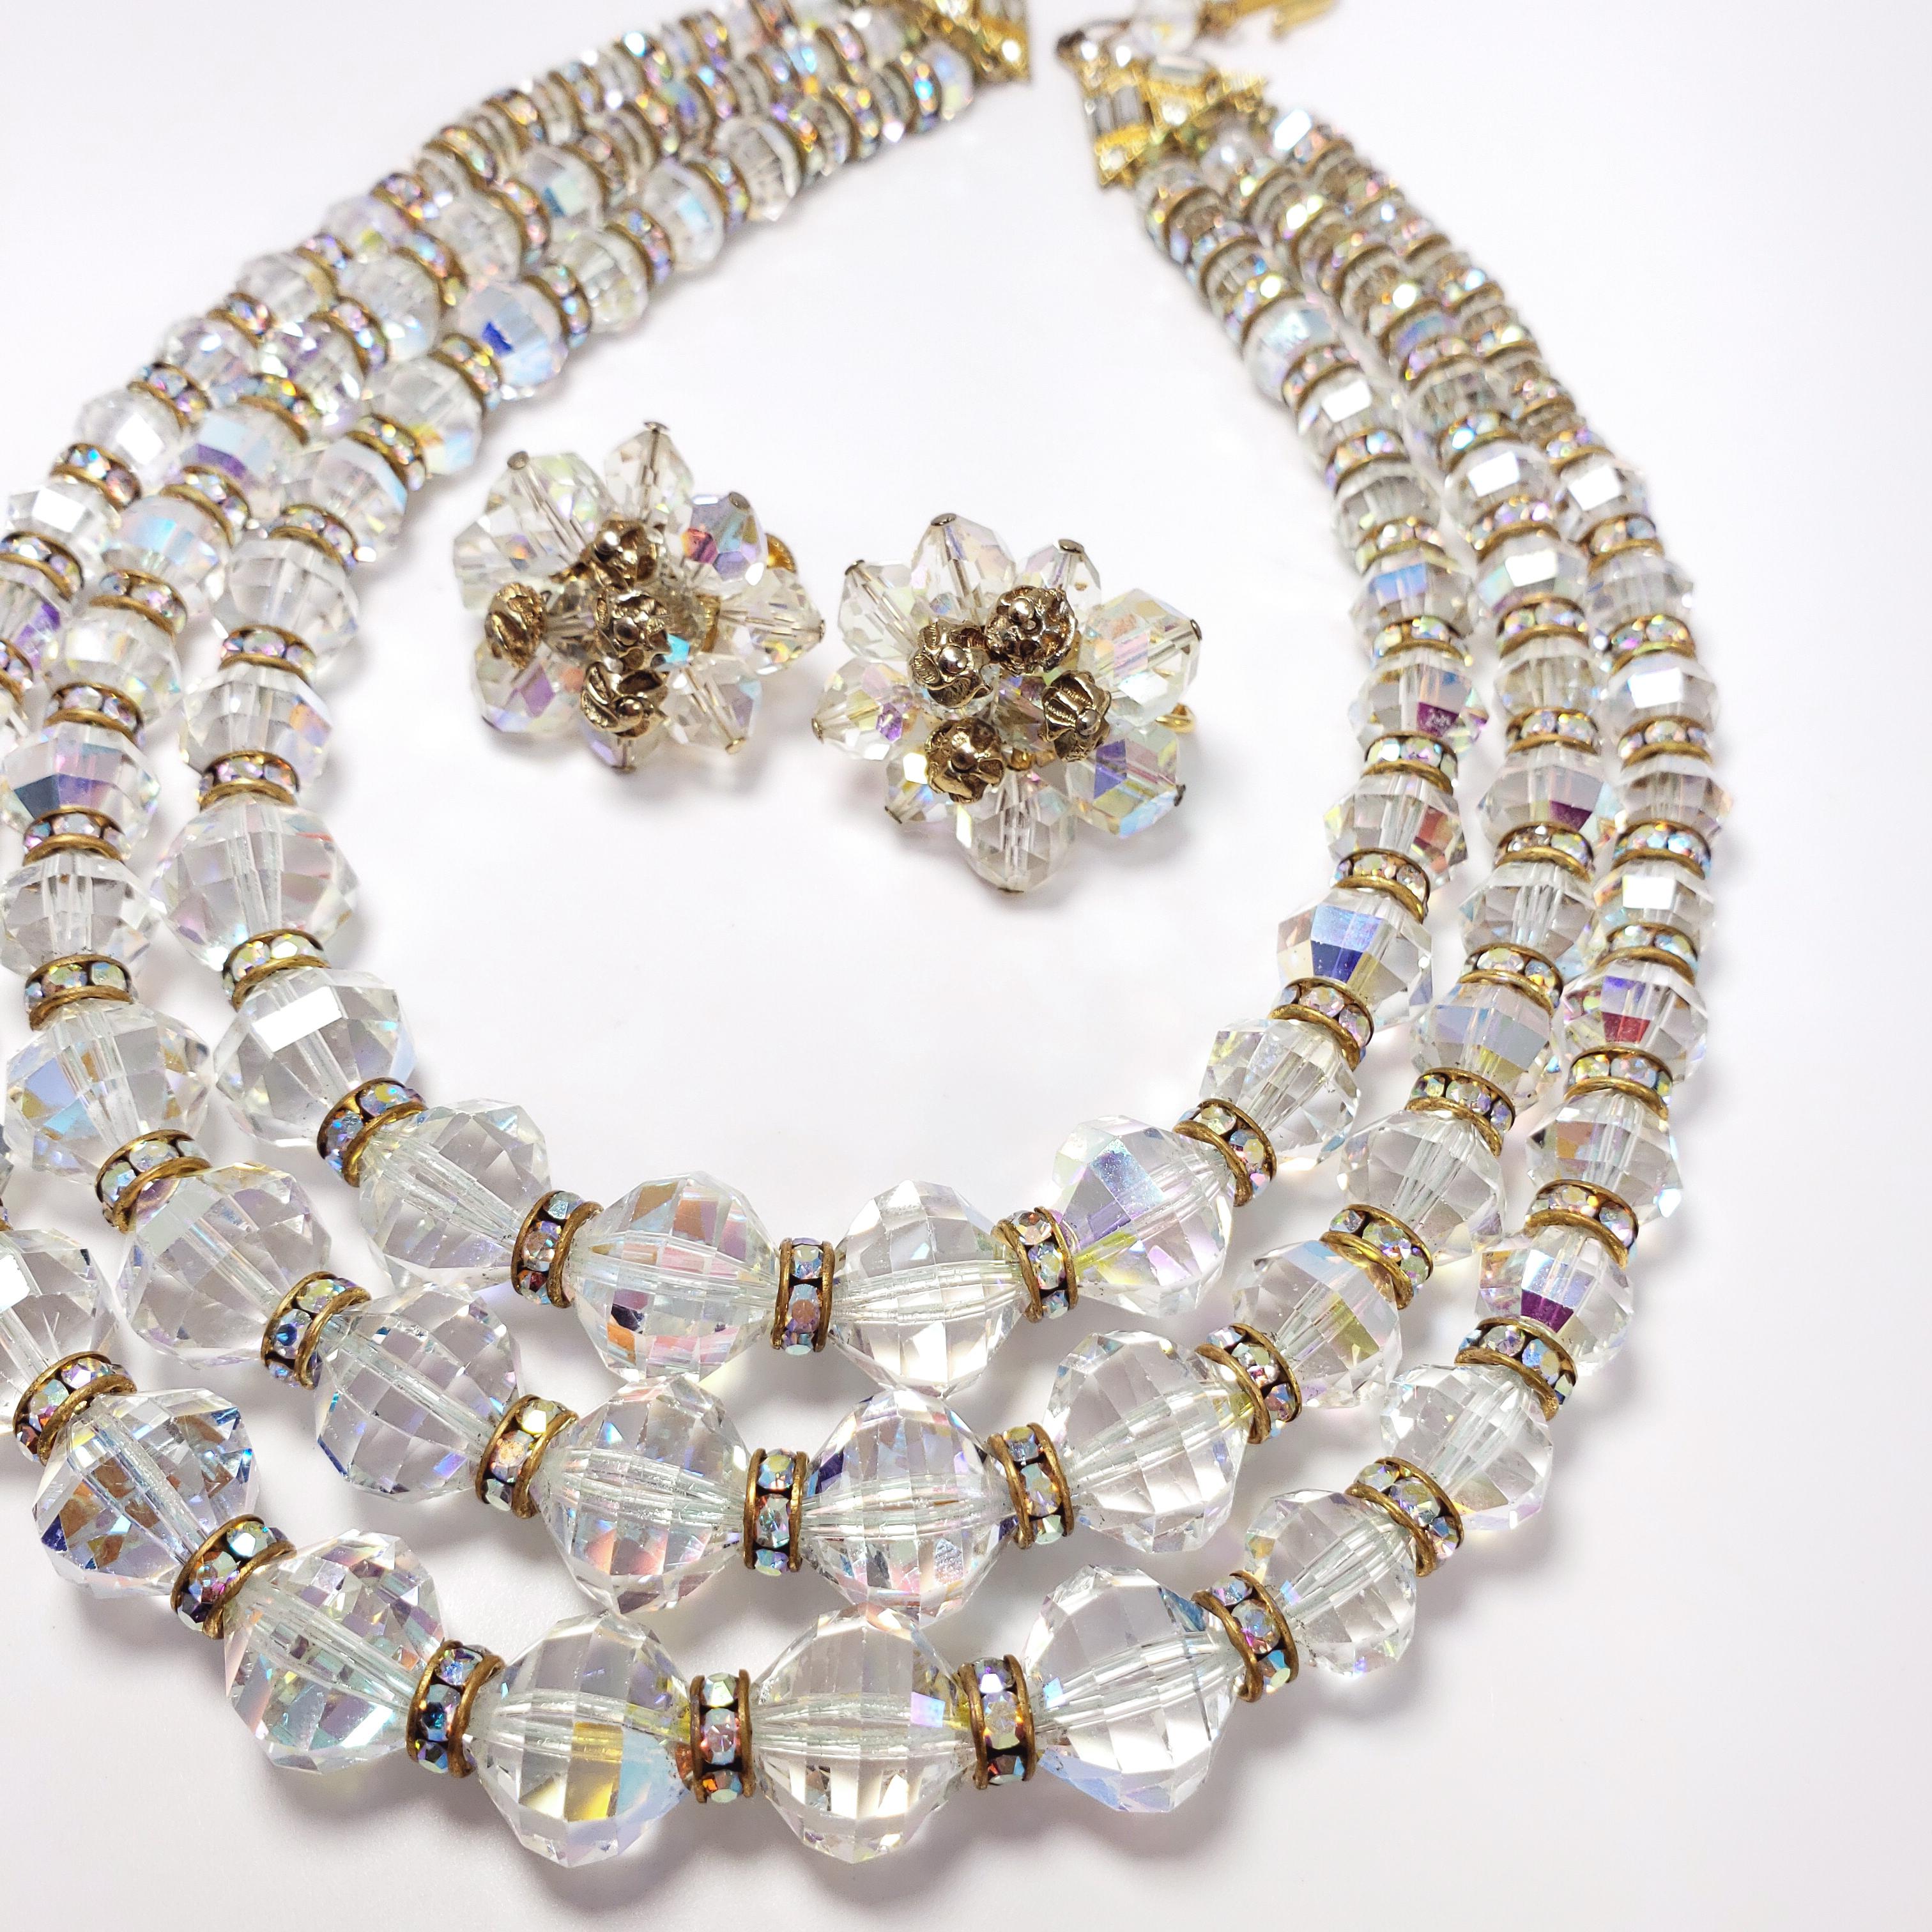 Details about   Italian Design Aurora Borealis AB Faceted Crystal 3 PC Necklace Earring Set 